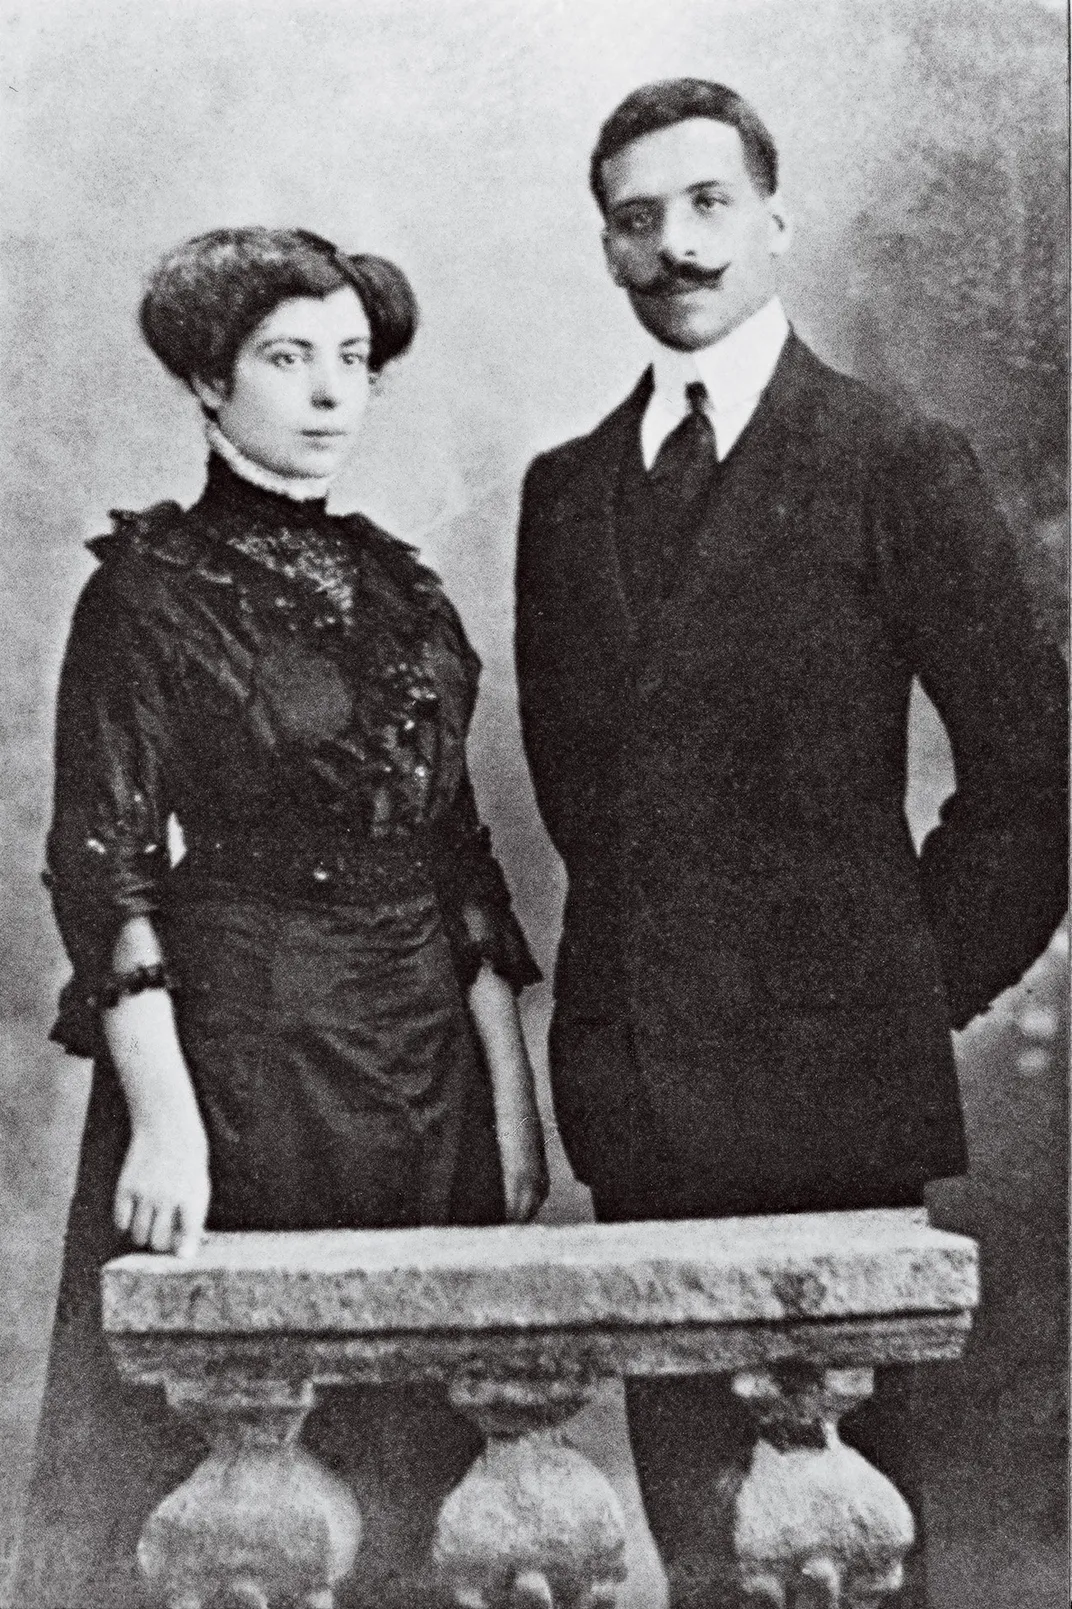 Sousa Mendes and his first wife, Angelina